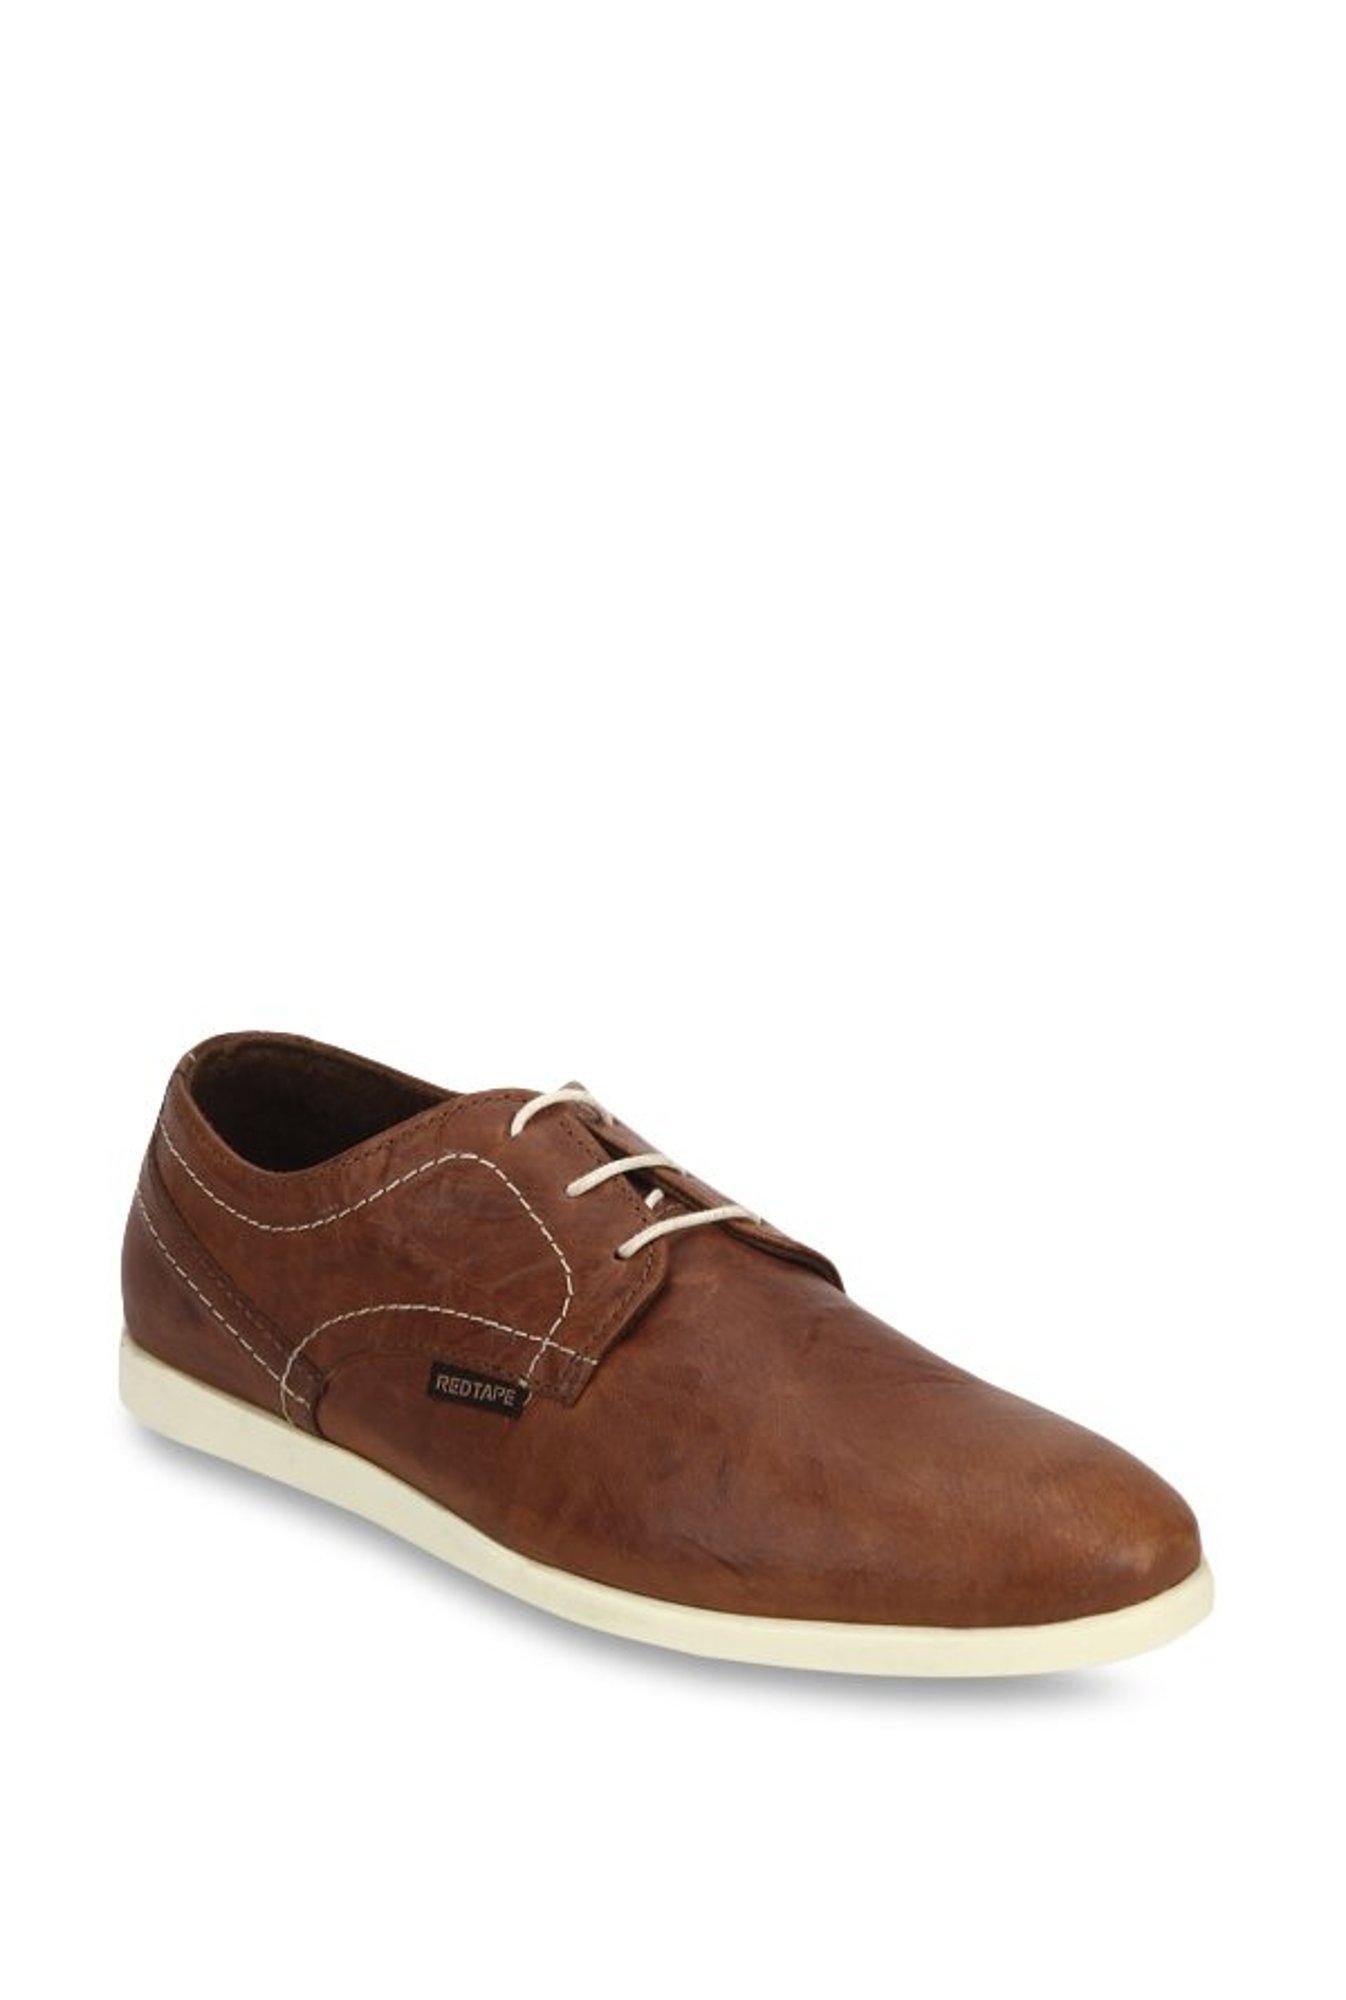 Buy Bond Street by Red Tape Navy & White Sneakers for Men at Best Price @  Tata CLiQ